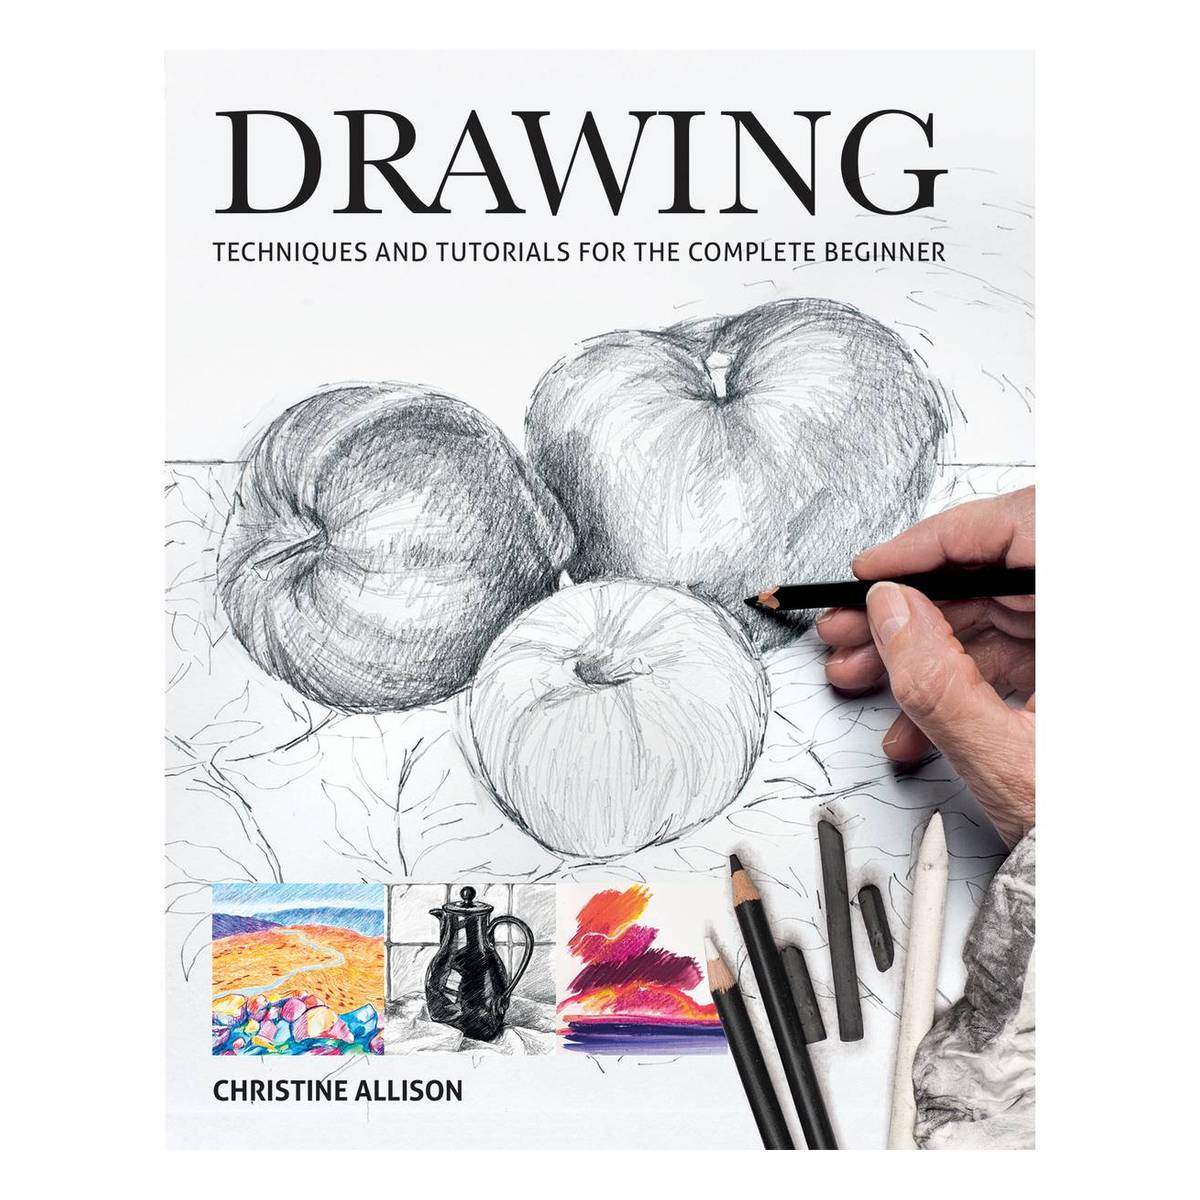 18 Easy drawing ideas for beginners  Start from the basics and have fun